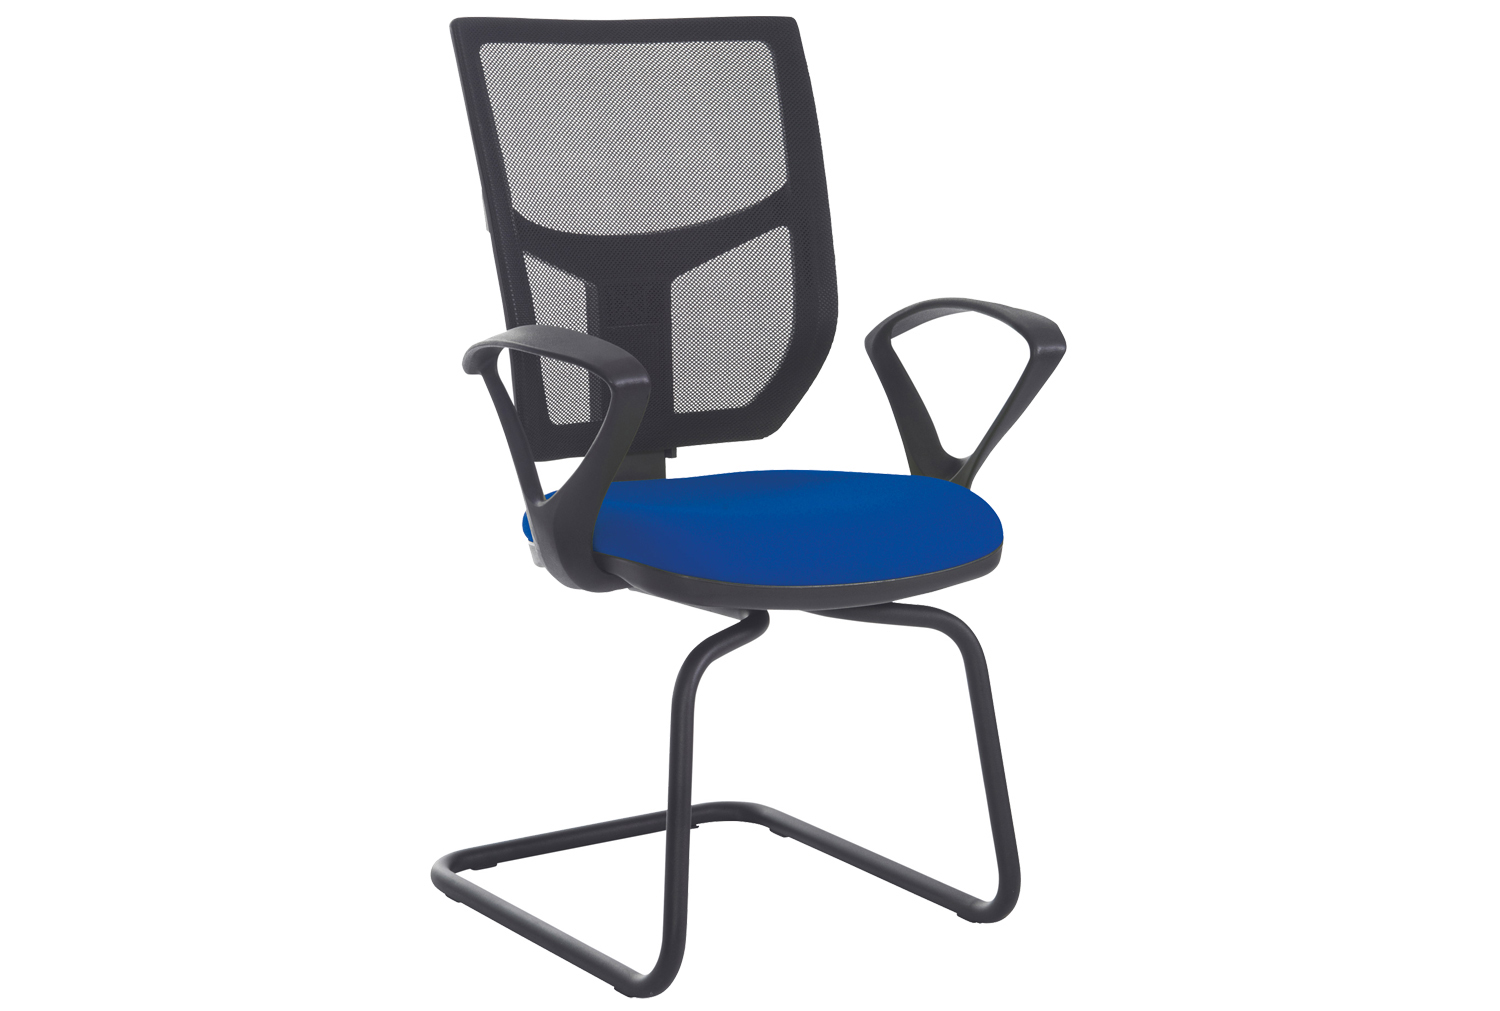 Gordy Mesh Back Cantilever ArmOffice Chair, Oxford